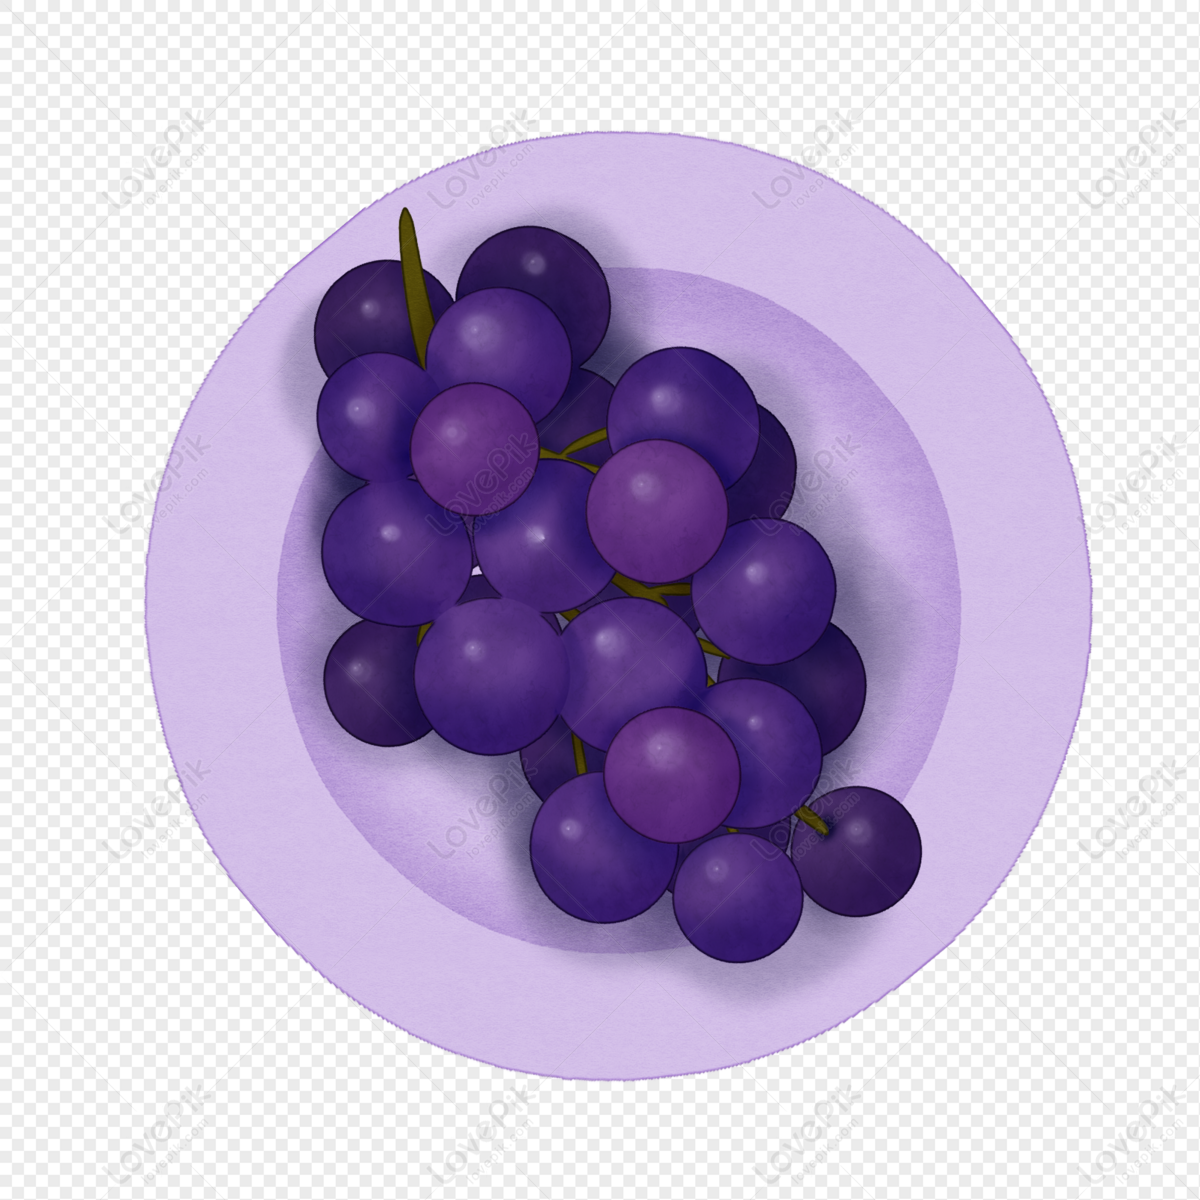 Cartoon Grape Fruit Illustration PNG Picture And Clipart Image For Free  Download - Lovepik | 401140575